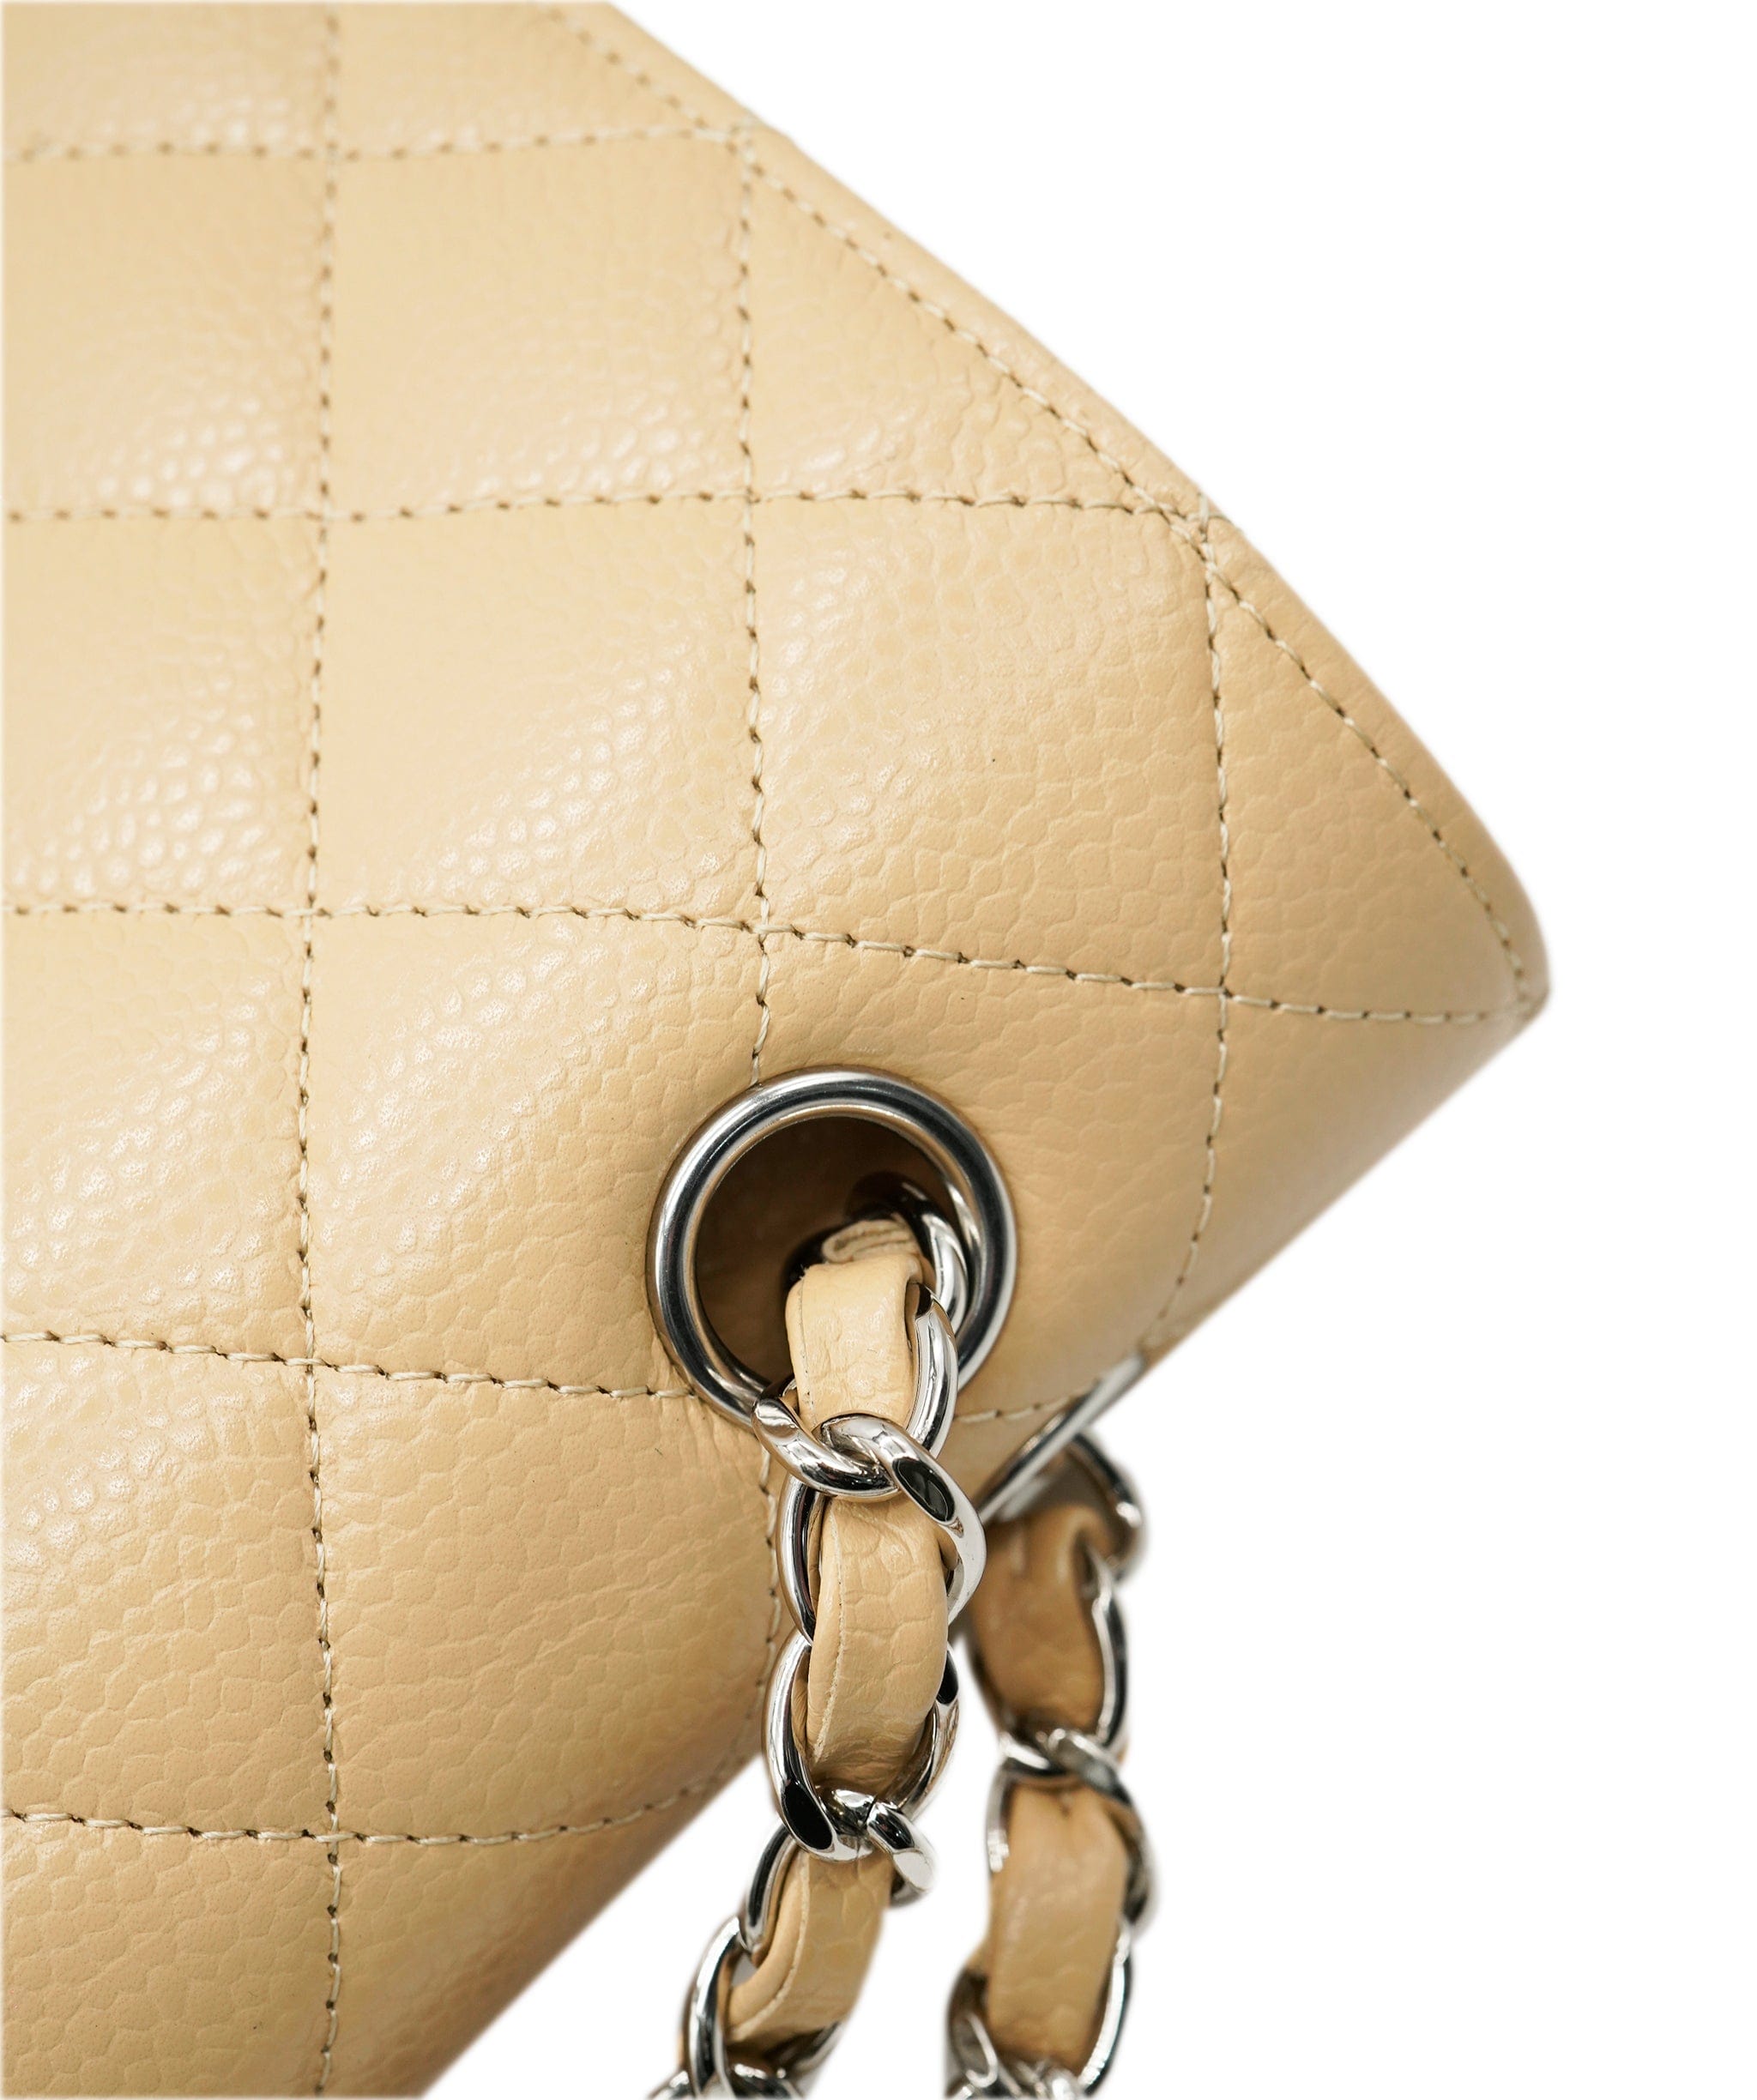 Chanel Chanel Classic Flap Beige Caviar with SHW -  ASL10223